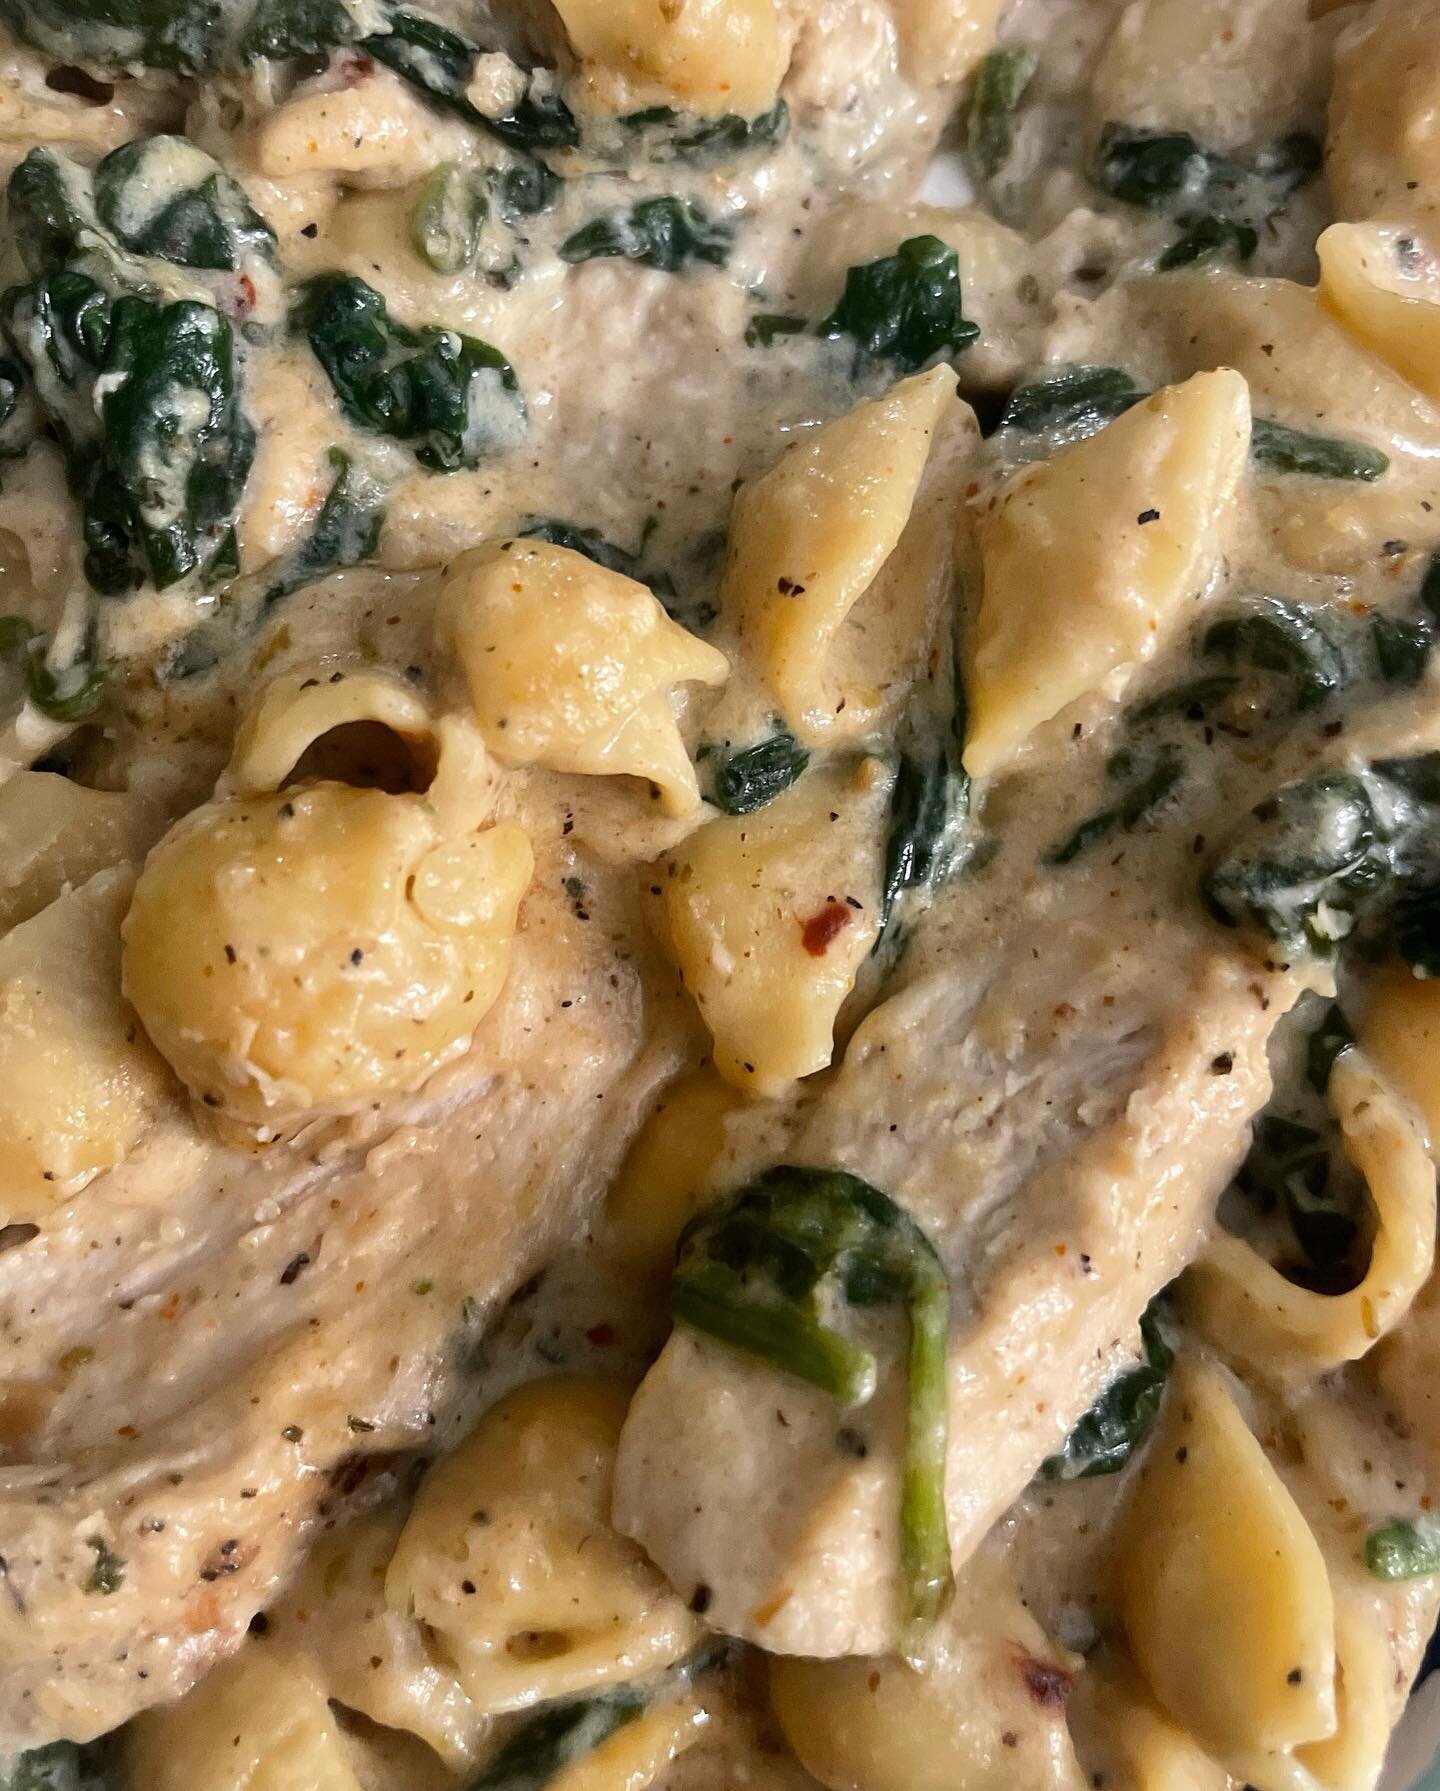 New plate alert 🚨 CHICKEN ALFREDO PASTA ON SALE! Ready for pickup on Sunday. Make sure to order through our website jordiesjoint.com in bio. #jordiesjoint #losangeles #laplates #lacatering